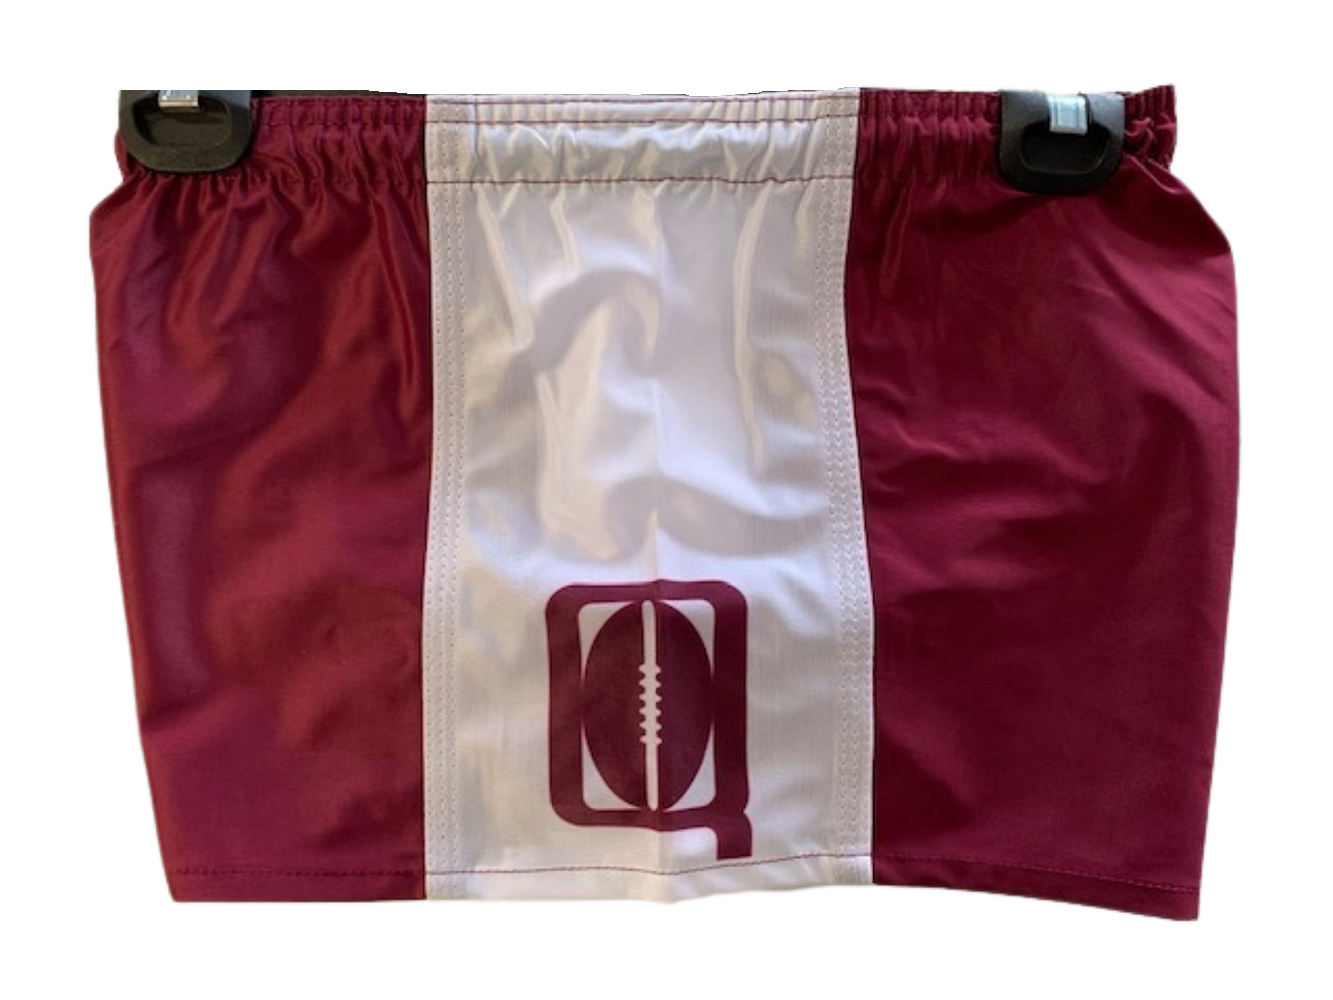 Queensland Maroons QLD 2021 NRL State of Origin 'Q' Hero Shorts Sizes S-5XL! 